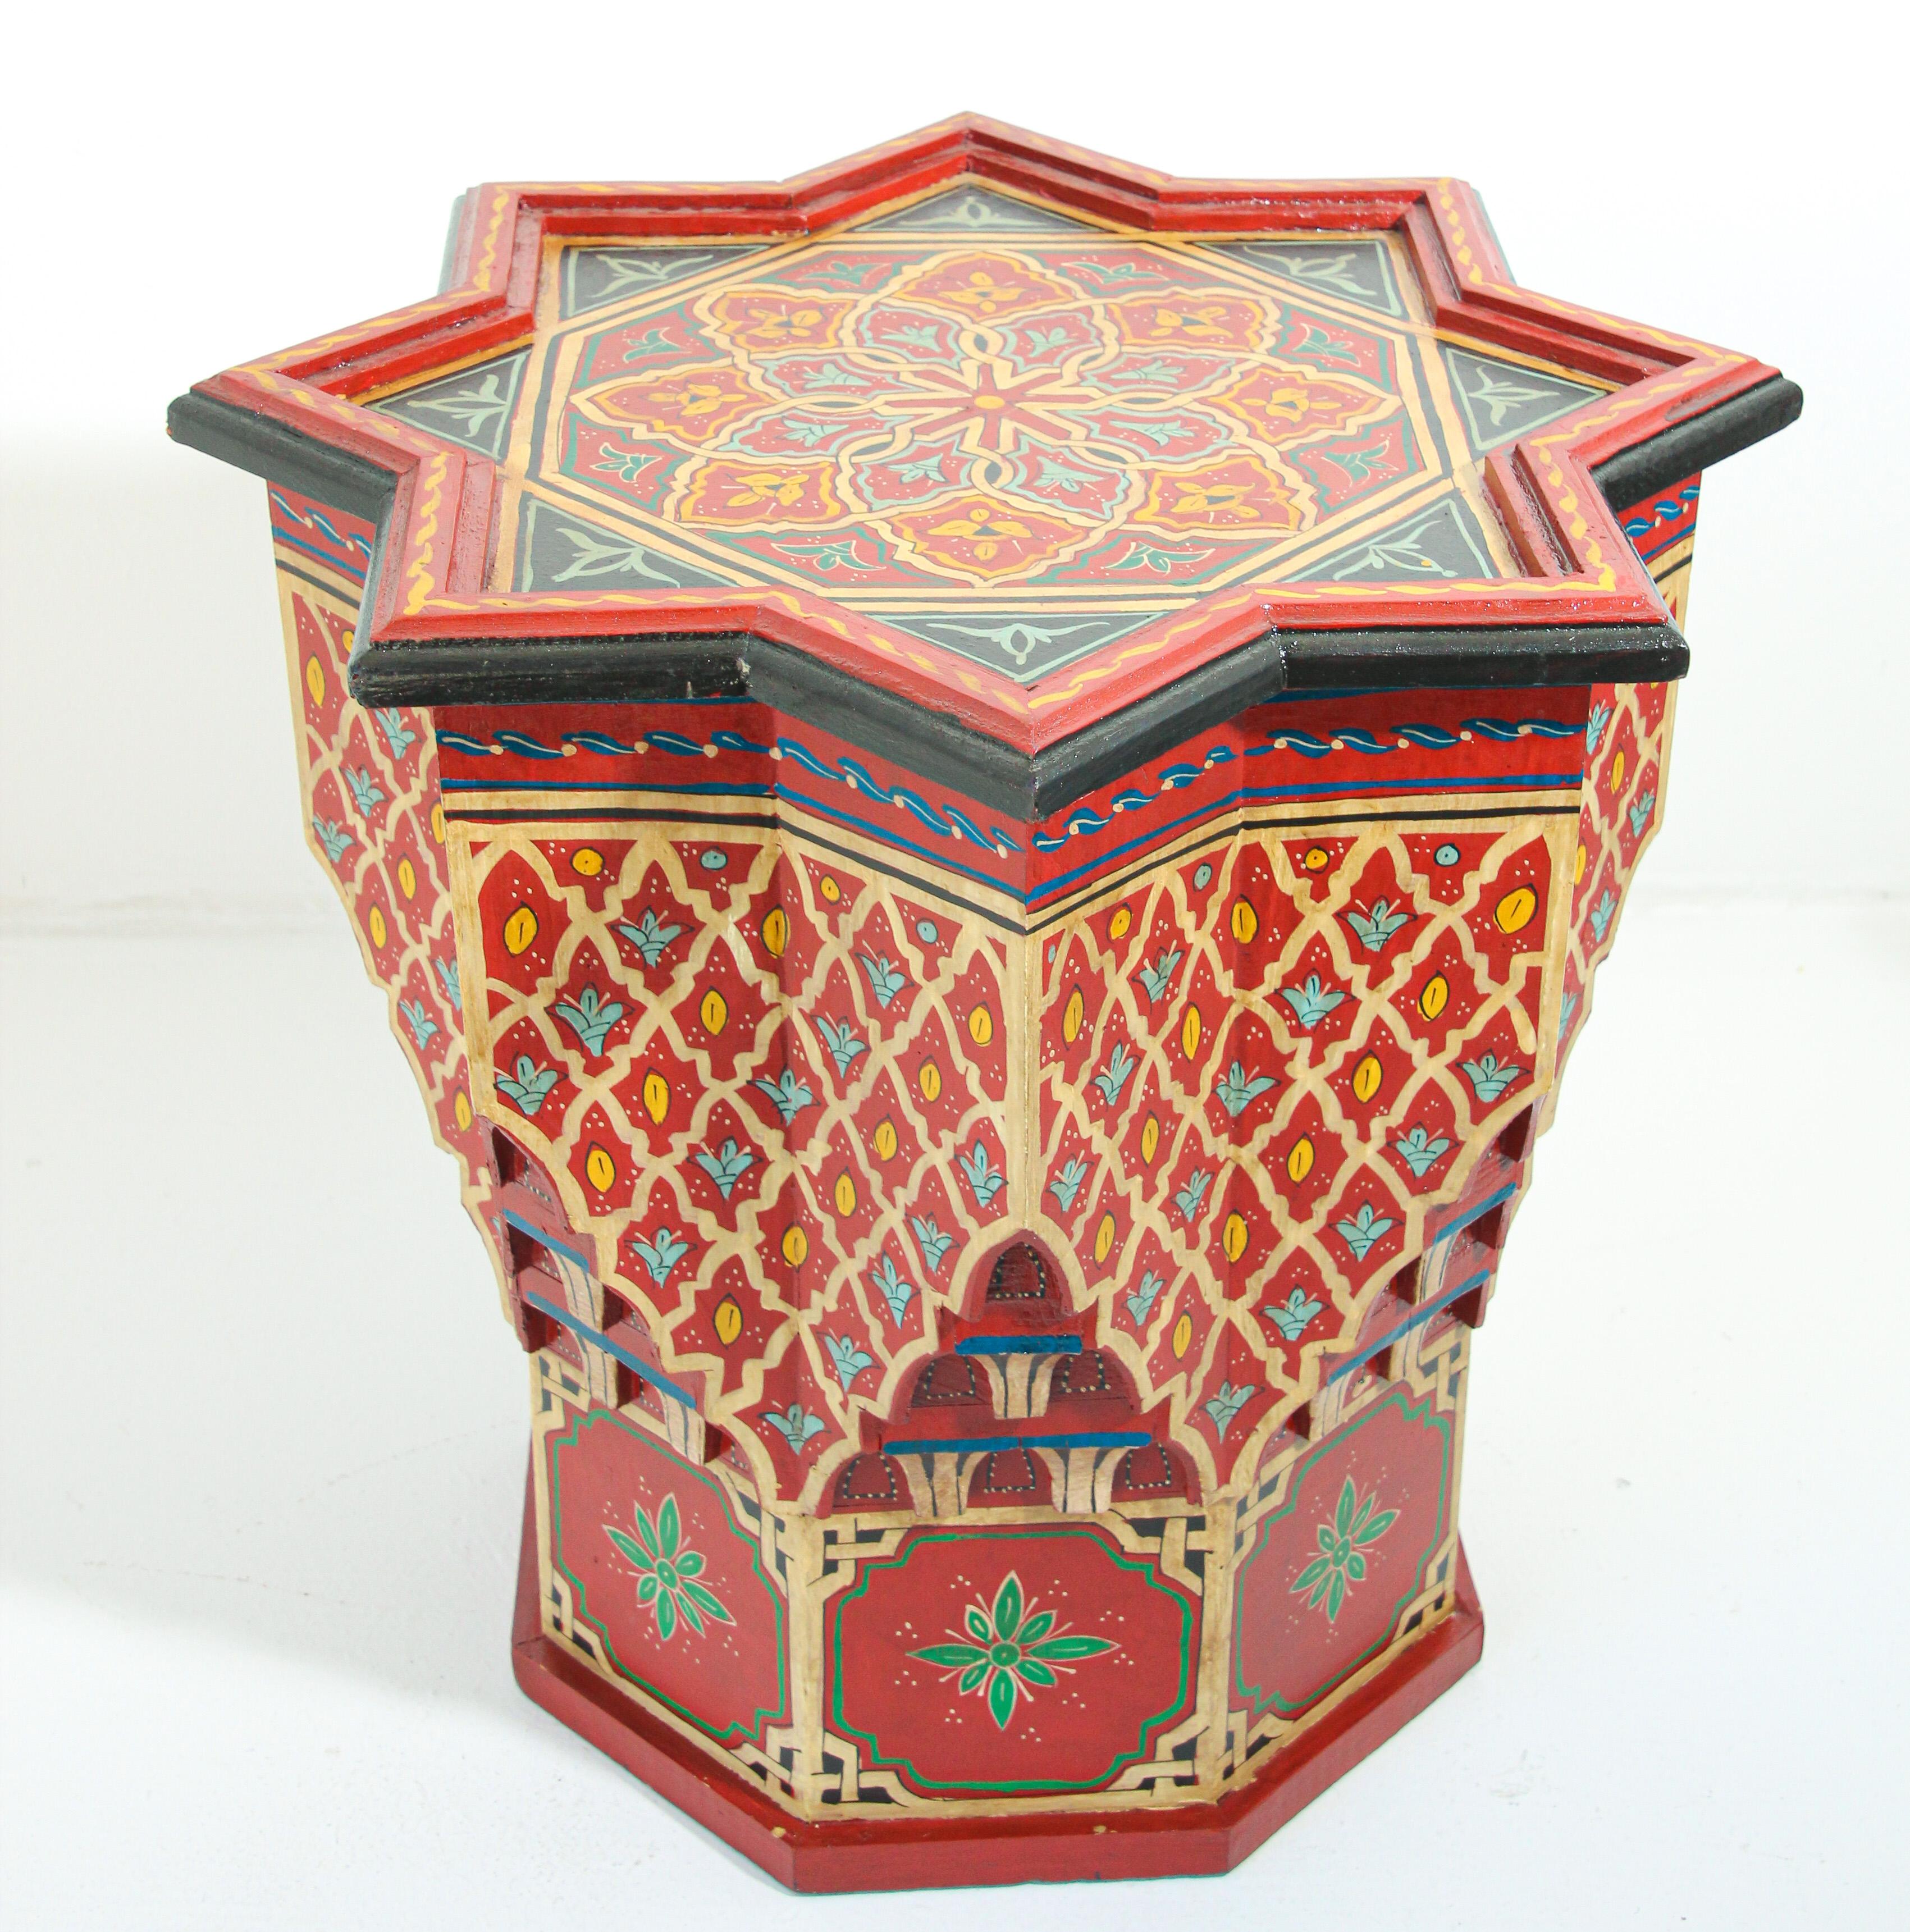 Moroccan colorful red hand painted and carved side occasional table with Moorish designs.
Pedestal table in red background with multicolored floral and geometric designs.
Very decorative fine artwork on a star shape top design.
Hand painted in